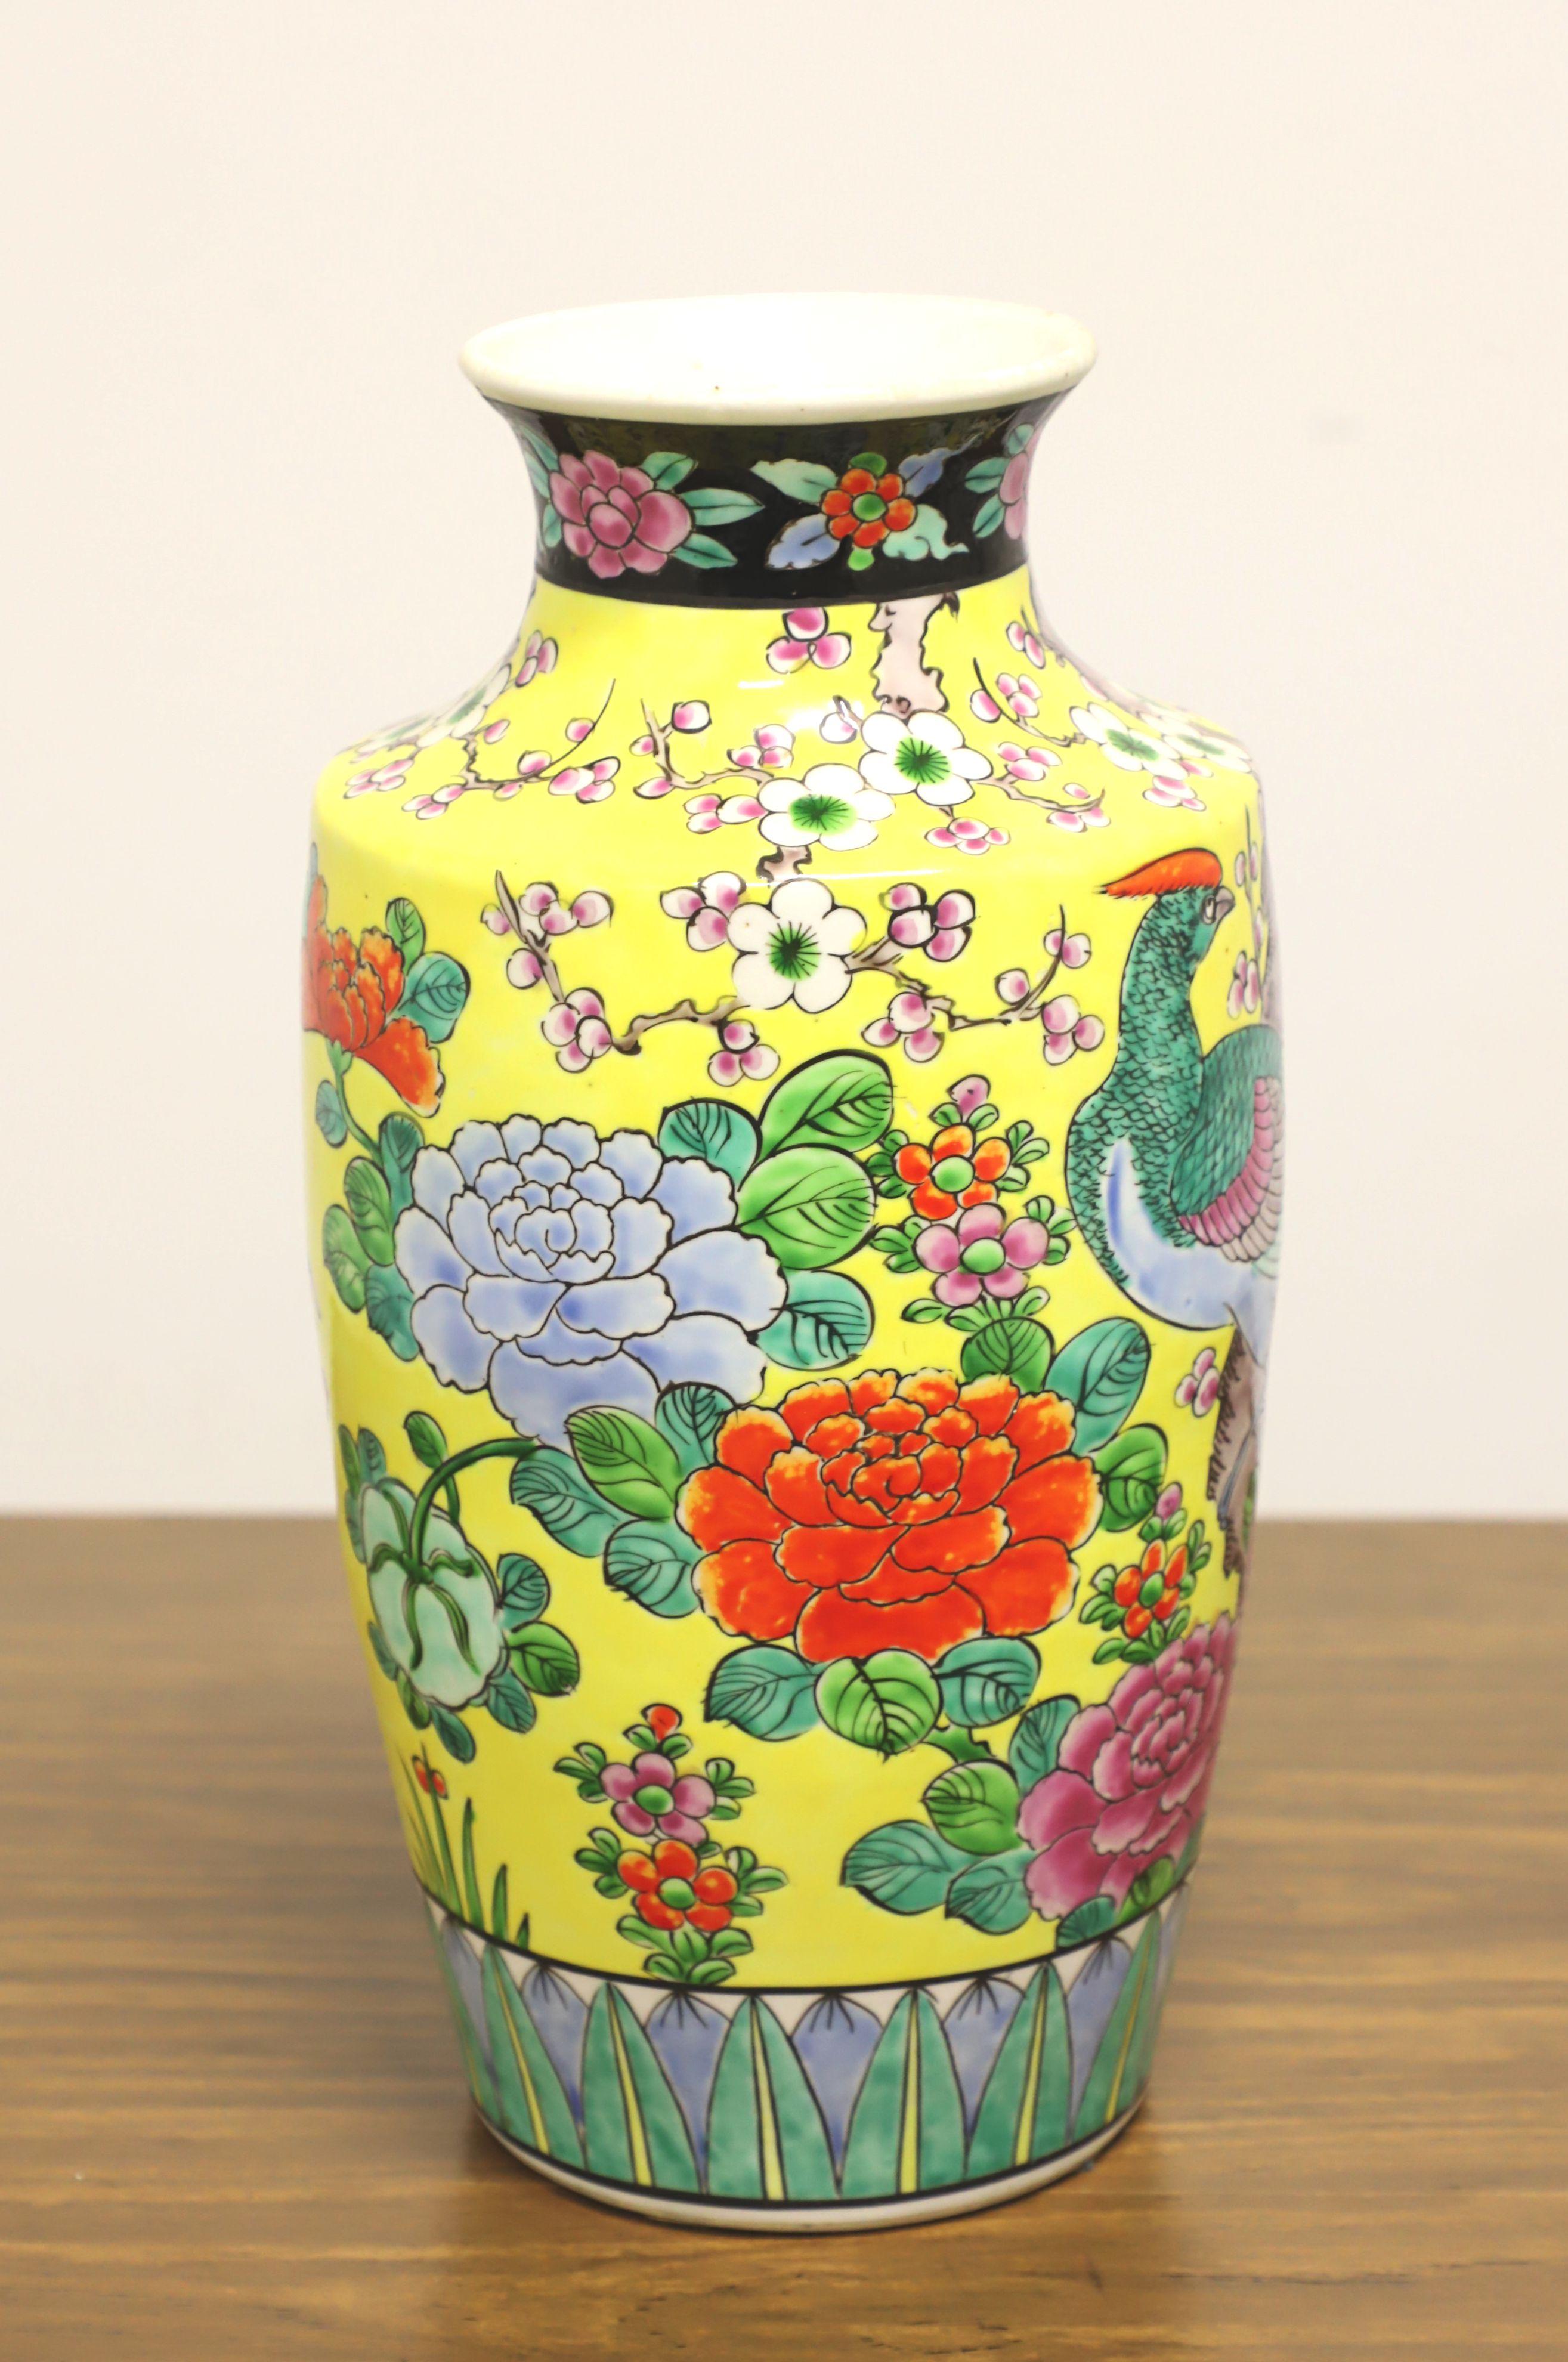 A Japanese chinoiserie style table vase, unbranded. Hand painted ceramic with a Japanese chinoiserie design of foliate, floral & birds in colorful shades of yellow, green, blue, pink, purple, white & black colors, and a tapered urn shape with short